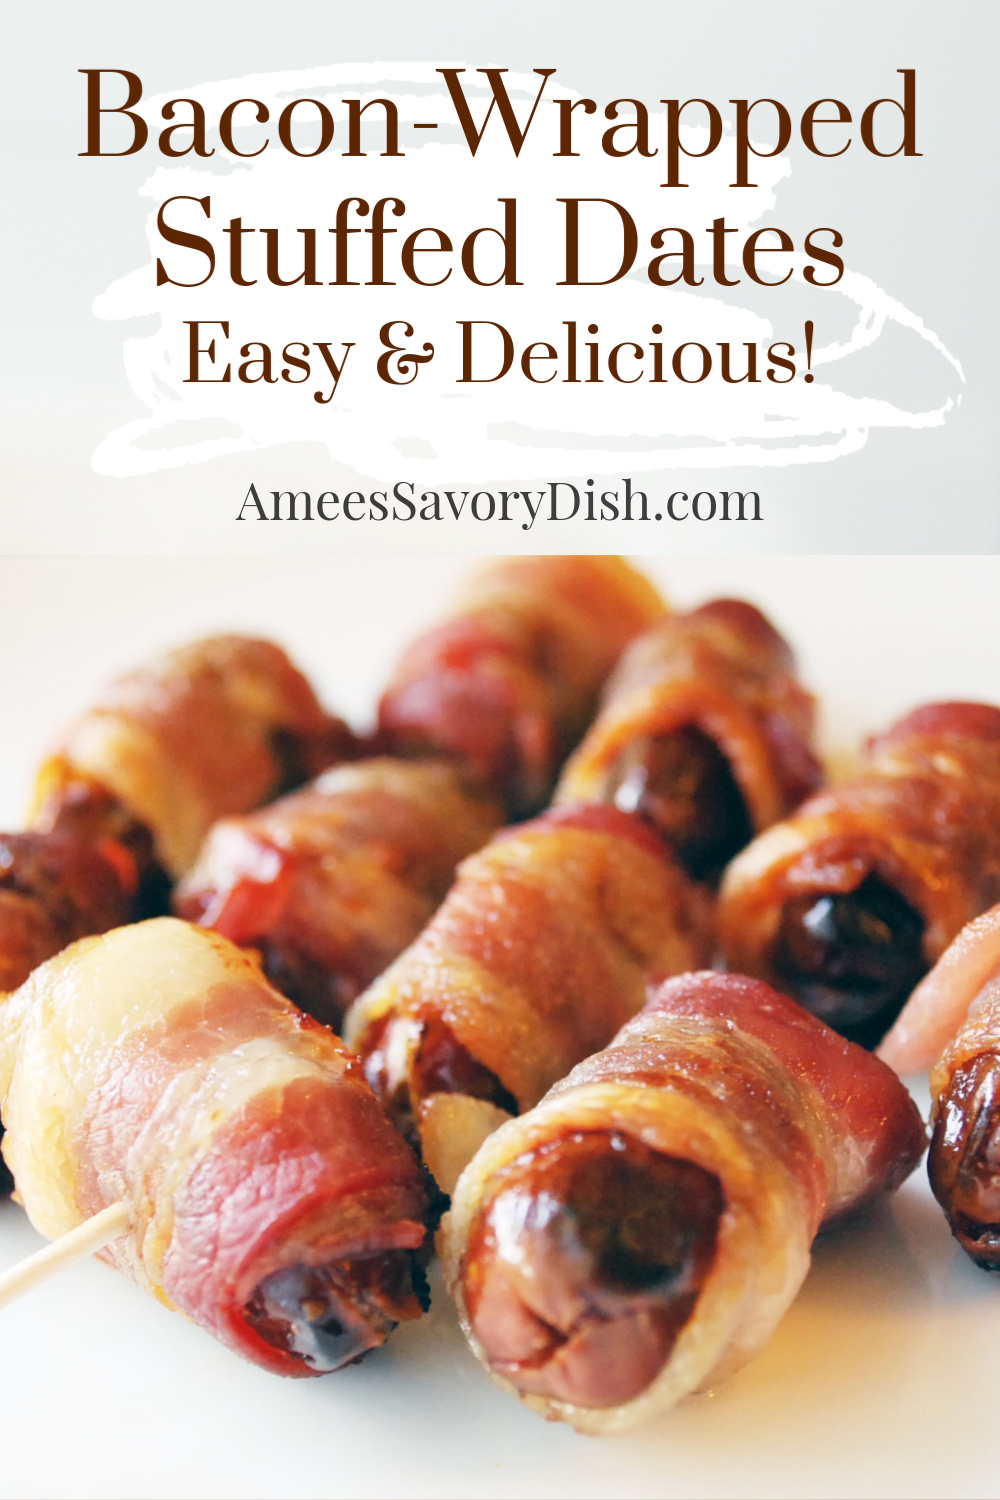 Bacon-wrapped stuffed dates are a quick and easy, gluten-free, dairy-free appetizer stuffed with almonds and baked in the oven to crispy perfection.  This is the perfect sweet and savory appetizer recipe for your next cocktail party! #stuffeddates #appetizerrecipe #baconwrappeddates via @Ameessavorydish